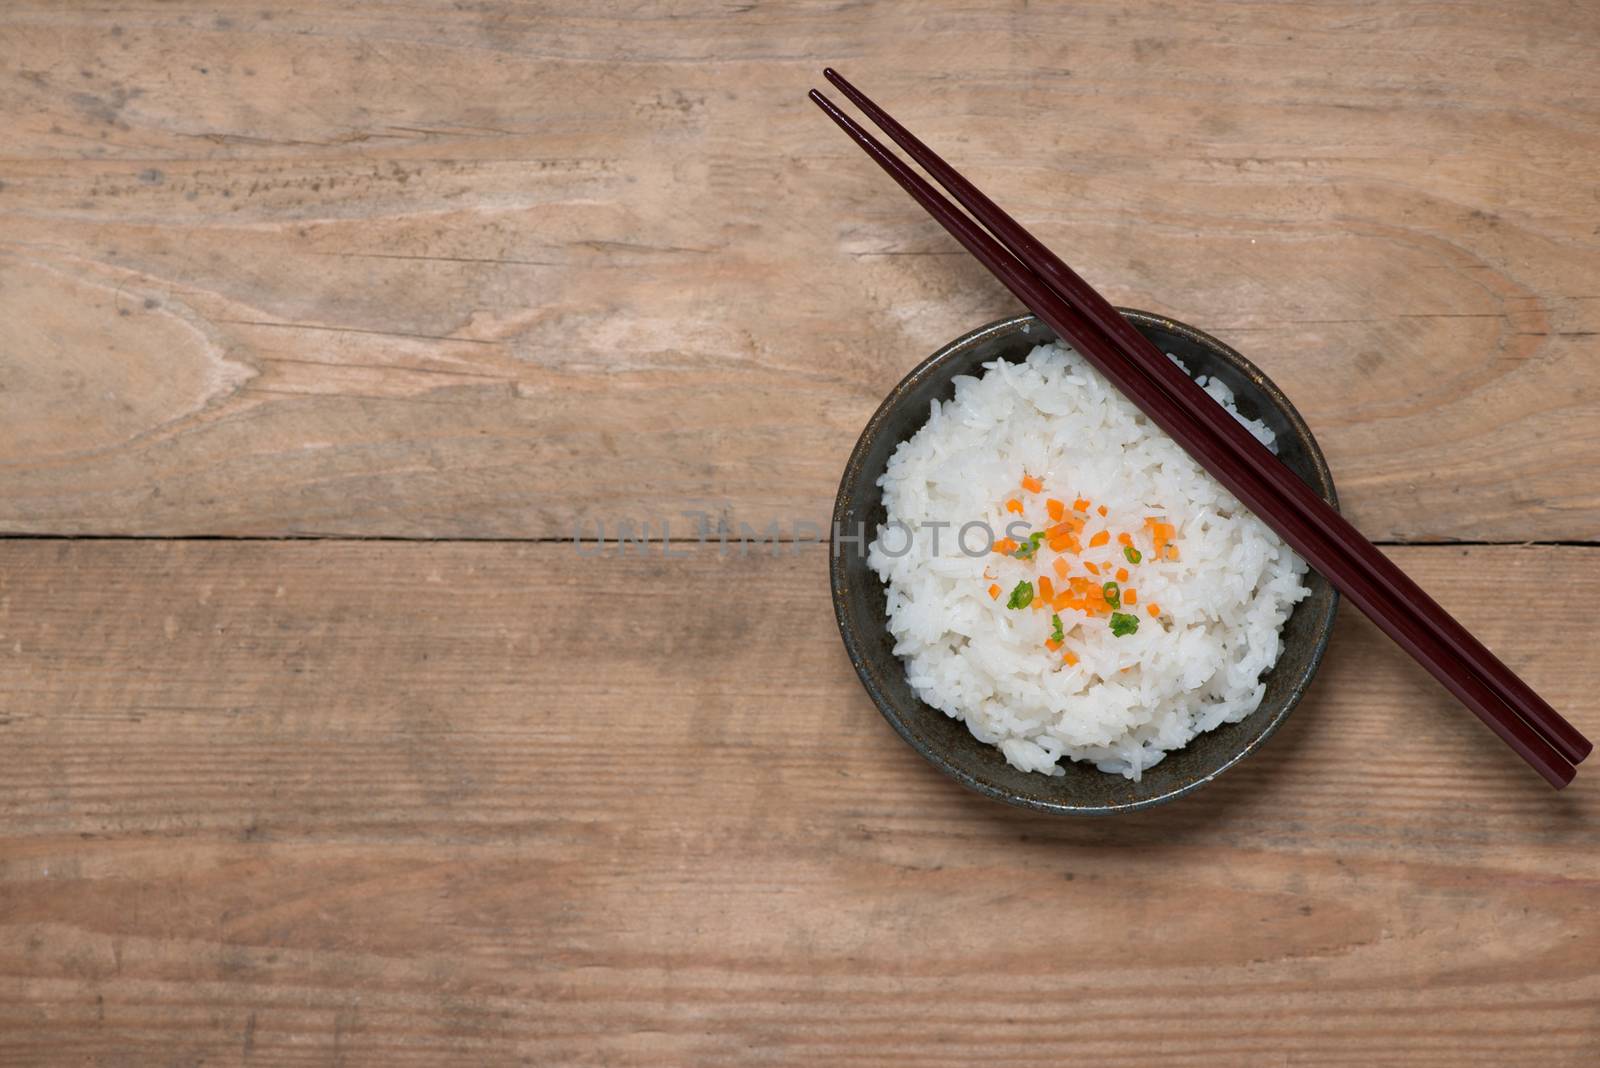 Boiled rice in a bowl on wooden table.